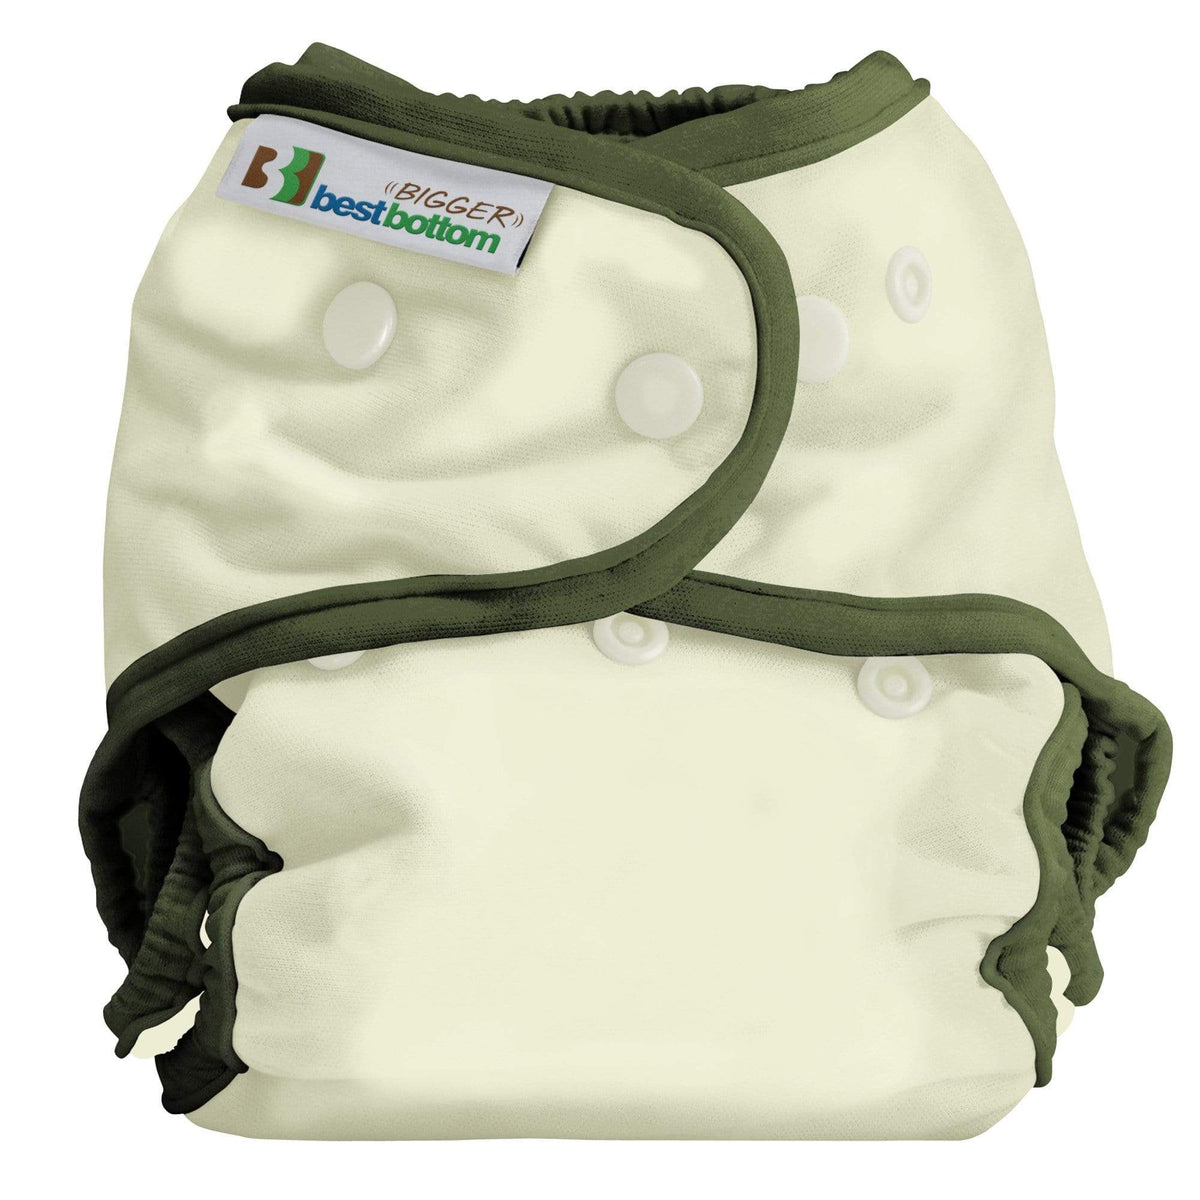 Planet Baby Newborn Organic Cloth Diapers, All-in-Two Reusable